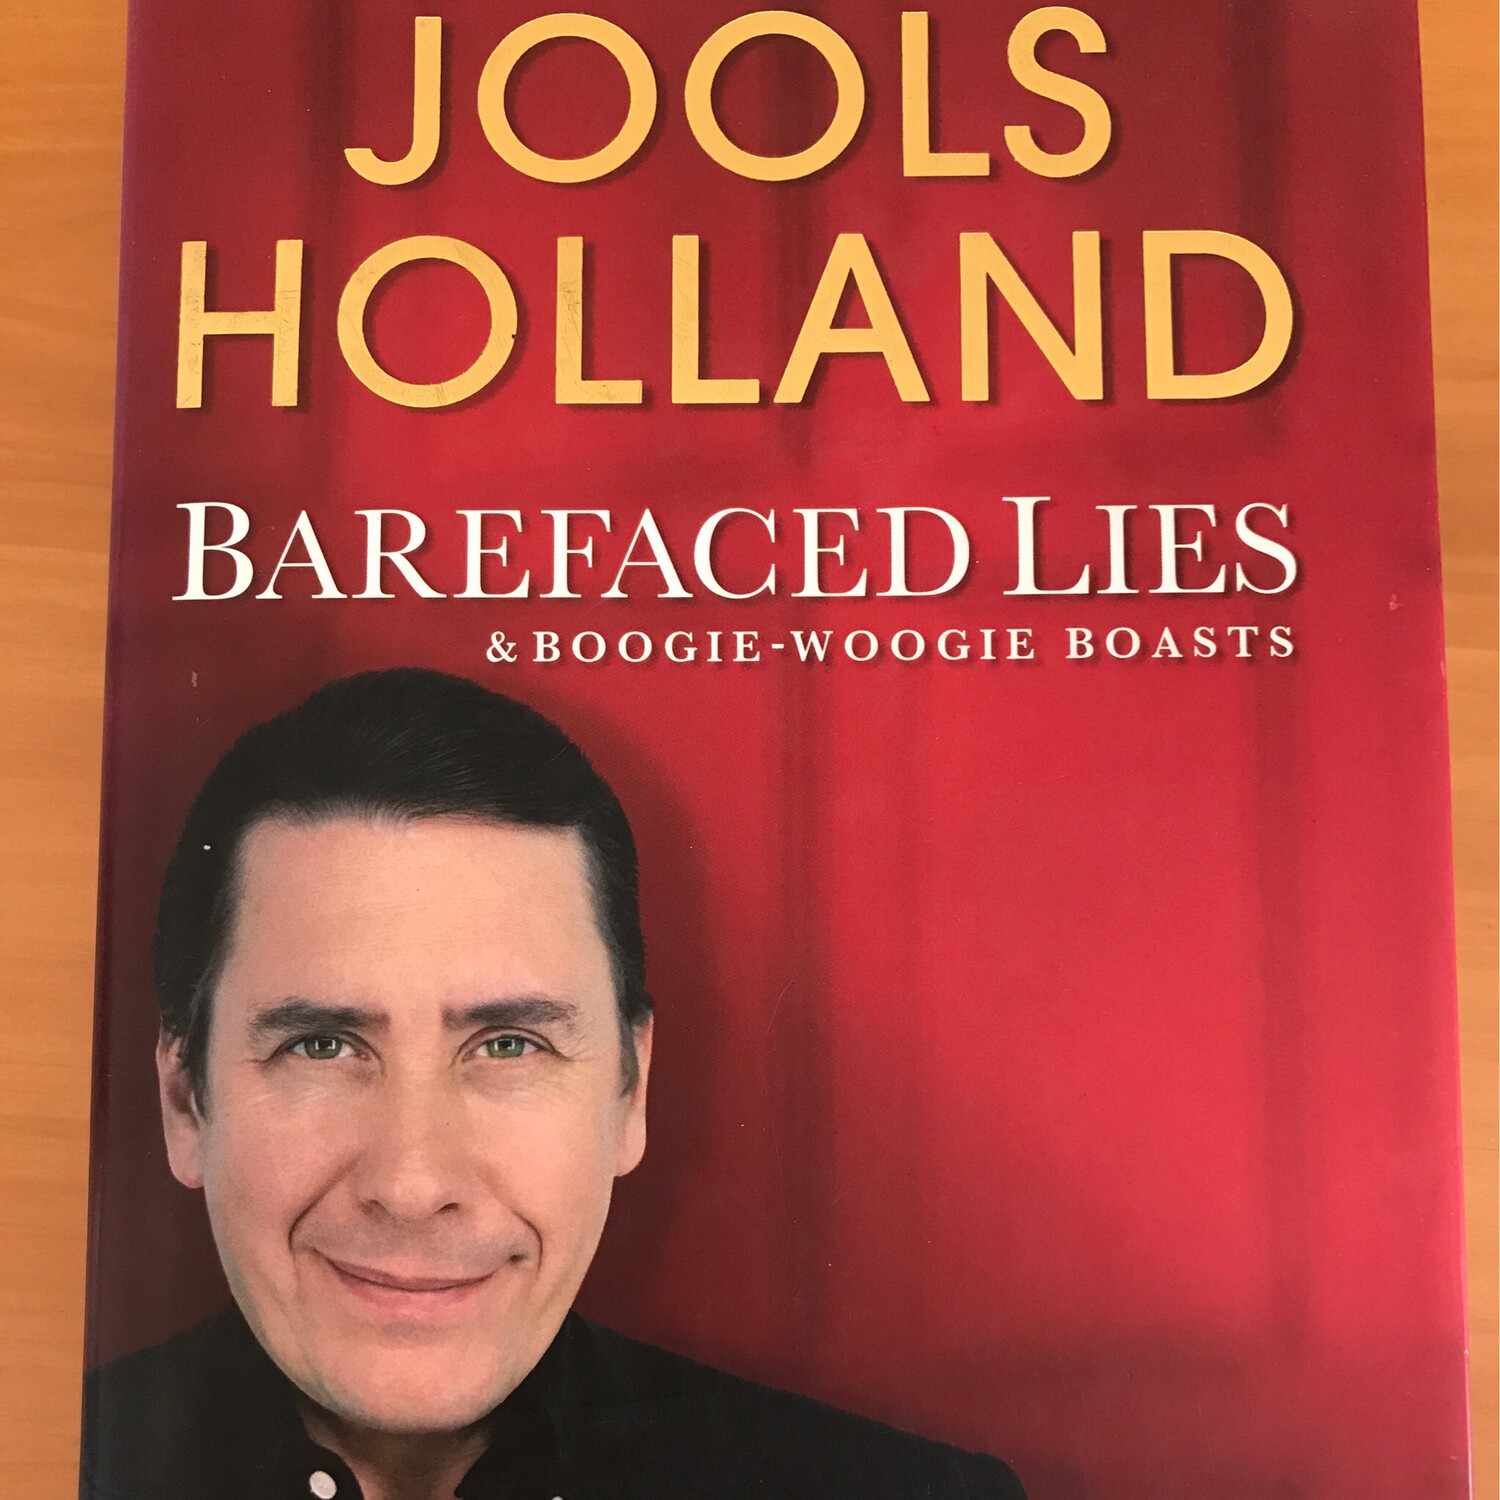 Barefaced Lies And Boogie - Woogie Boasts, Jools Holland